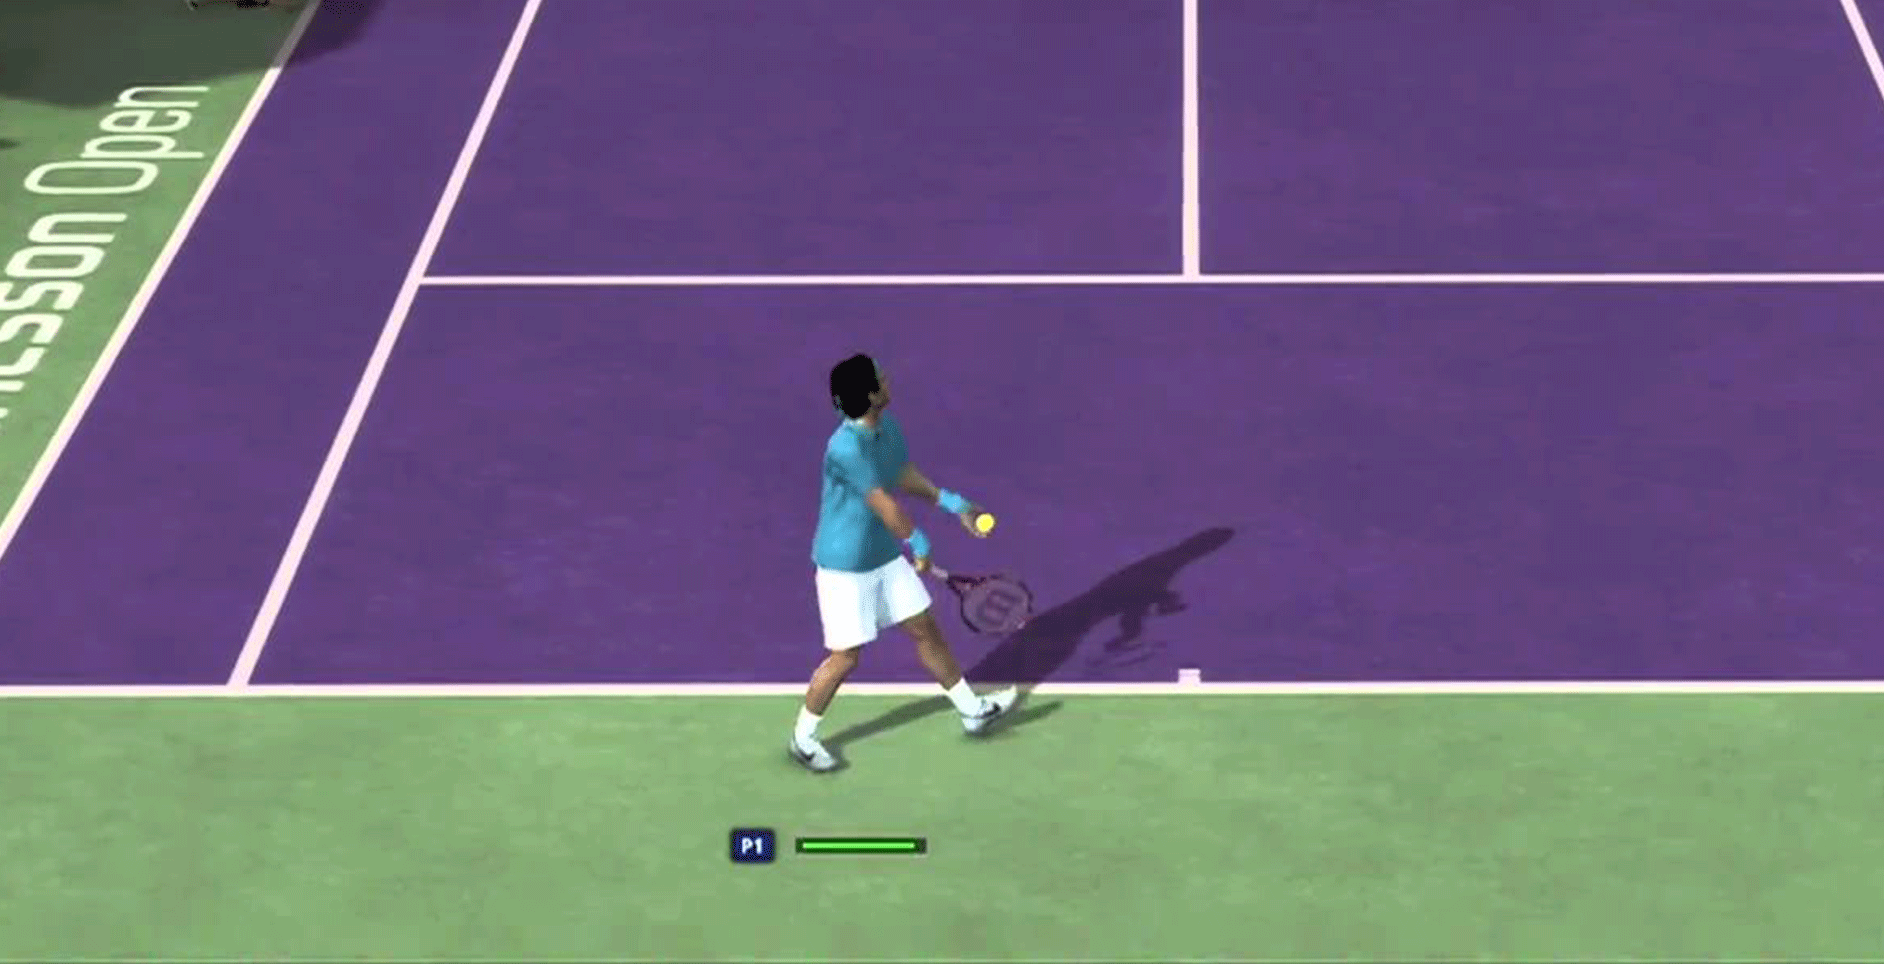 ps4 best tennis game